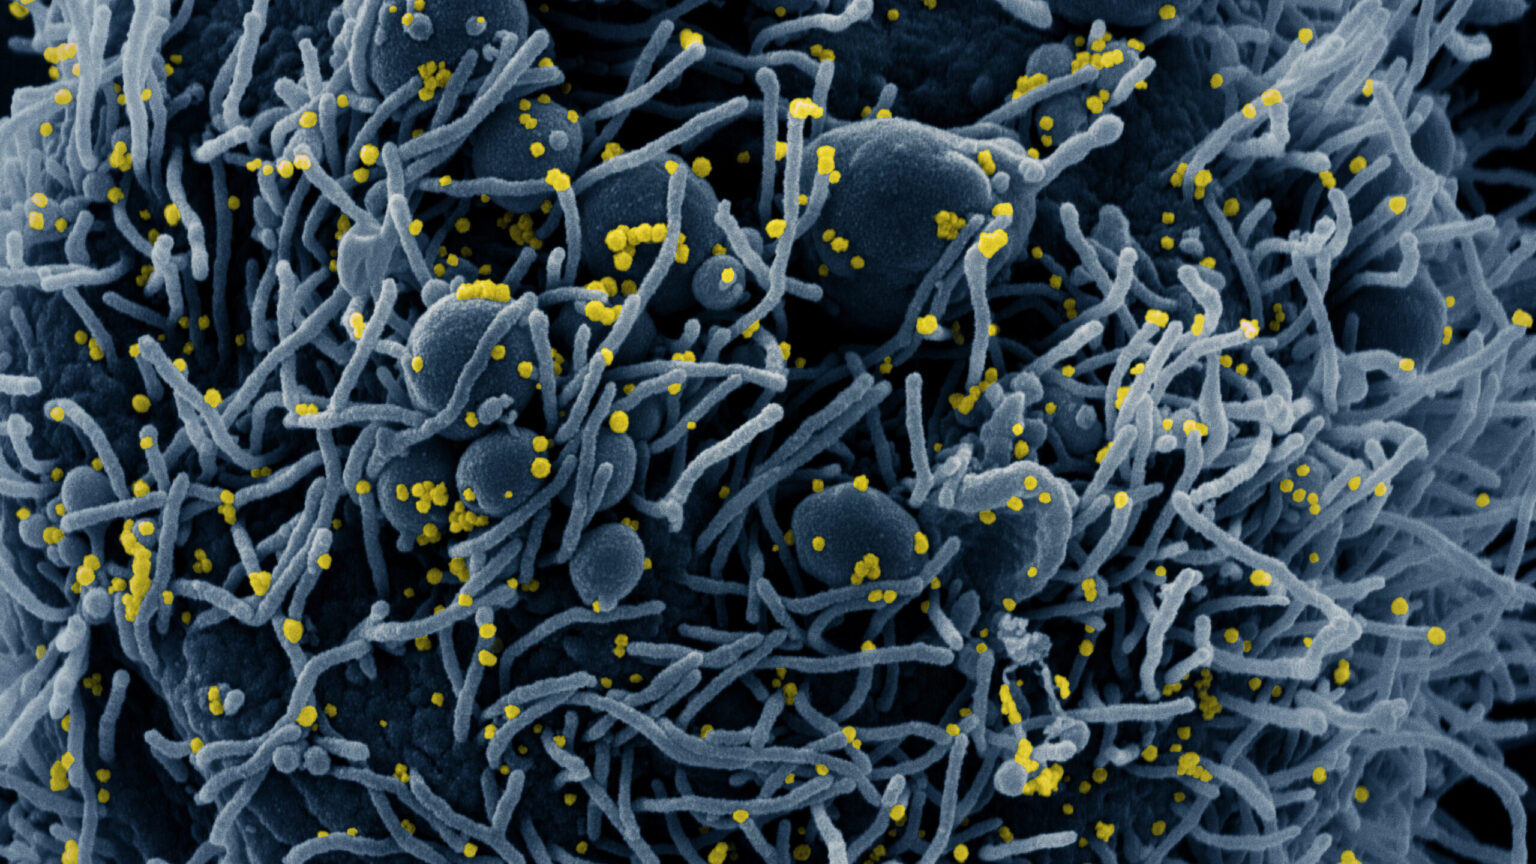 Colorized scanning electron micrograph of an apoptotic cell (blue) infected with SARS-COV-2 virus particles (yellow), isolated from a patient sample. Image captured at the NIAID Integrated Research Facility (IRF) in Fort Detrick, Maryland. (Courtesy: NIAID)